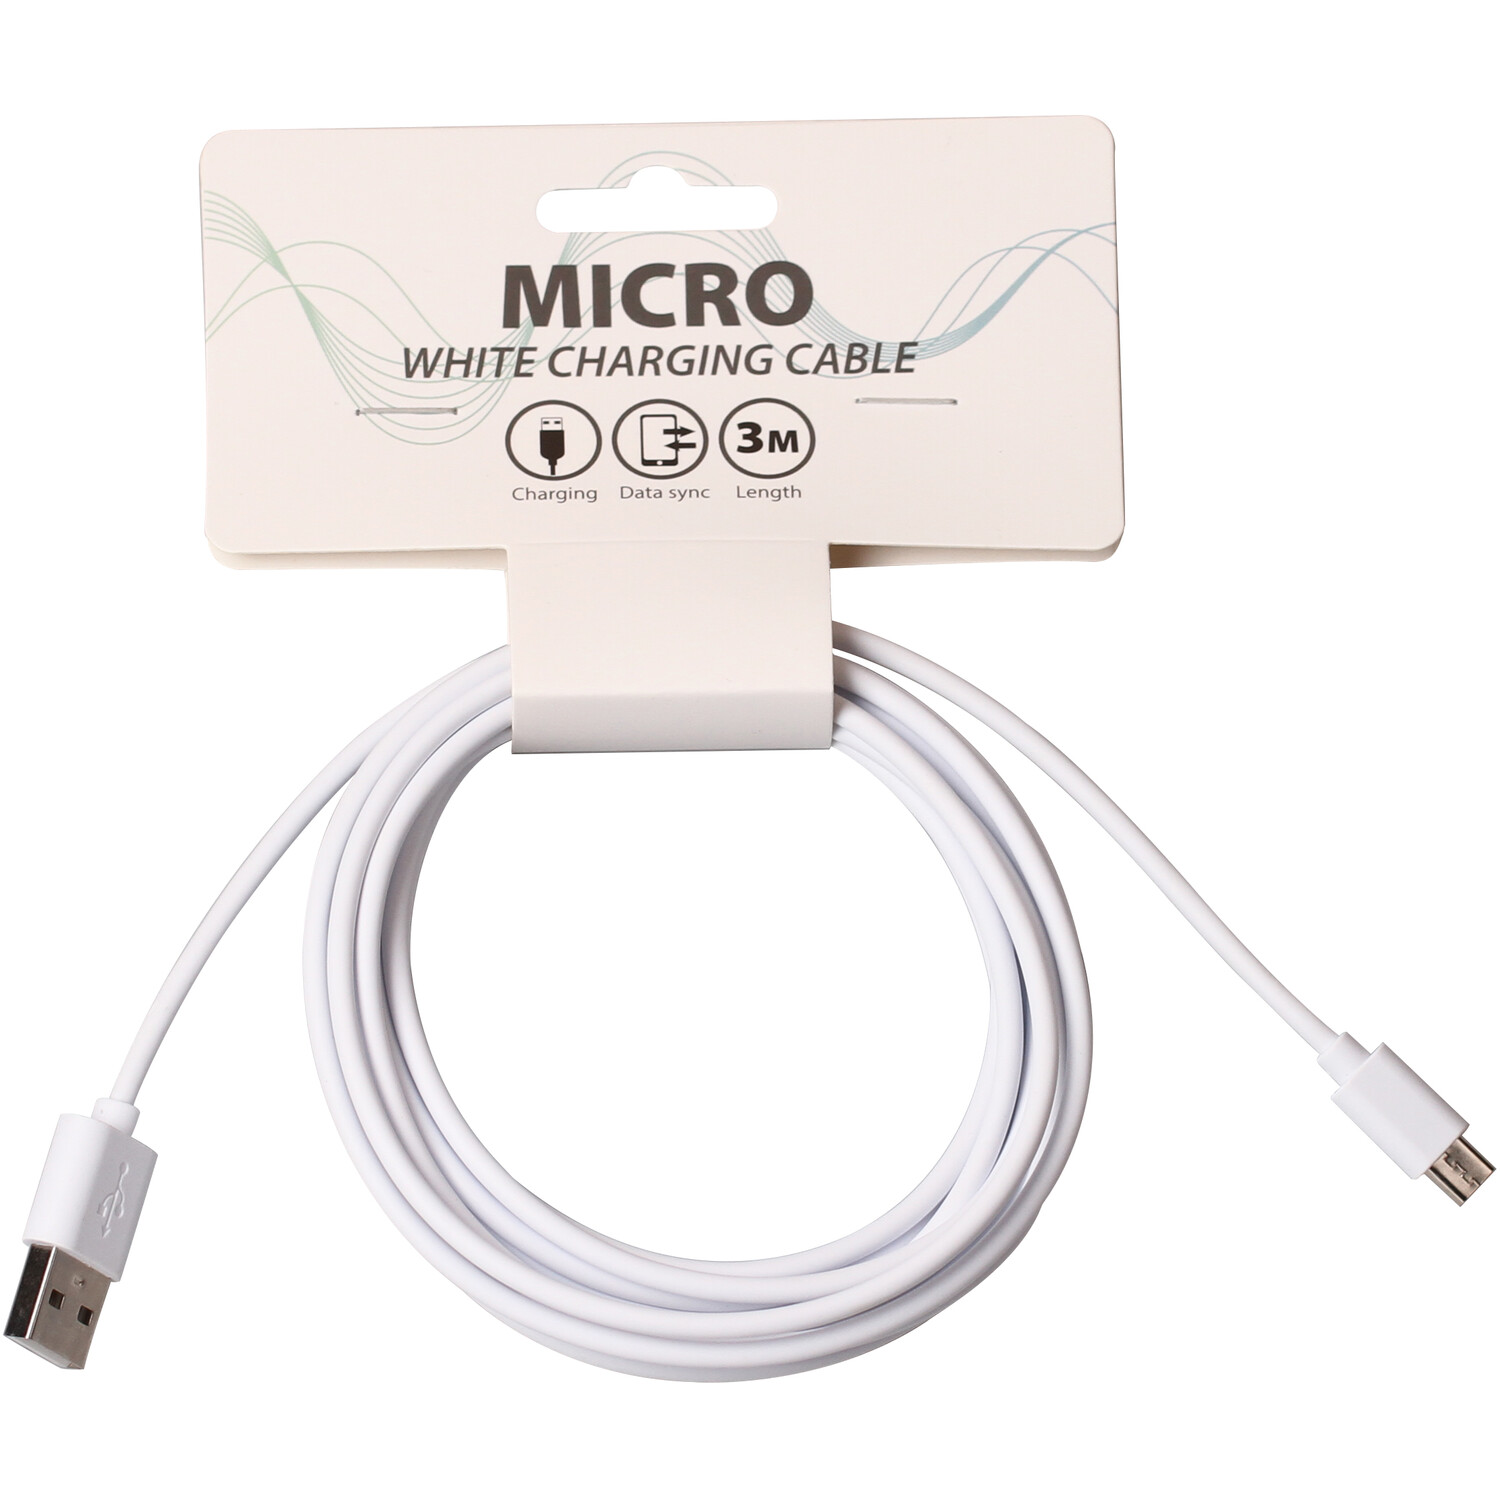 Micro White Charging Cable Image